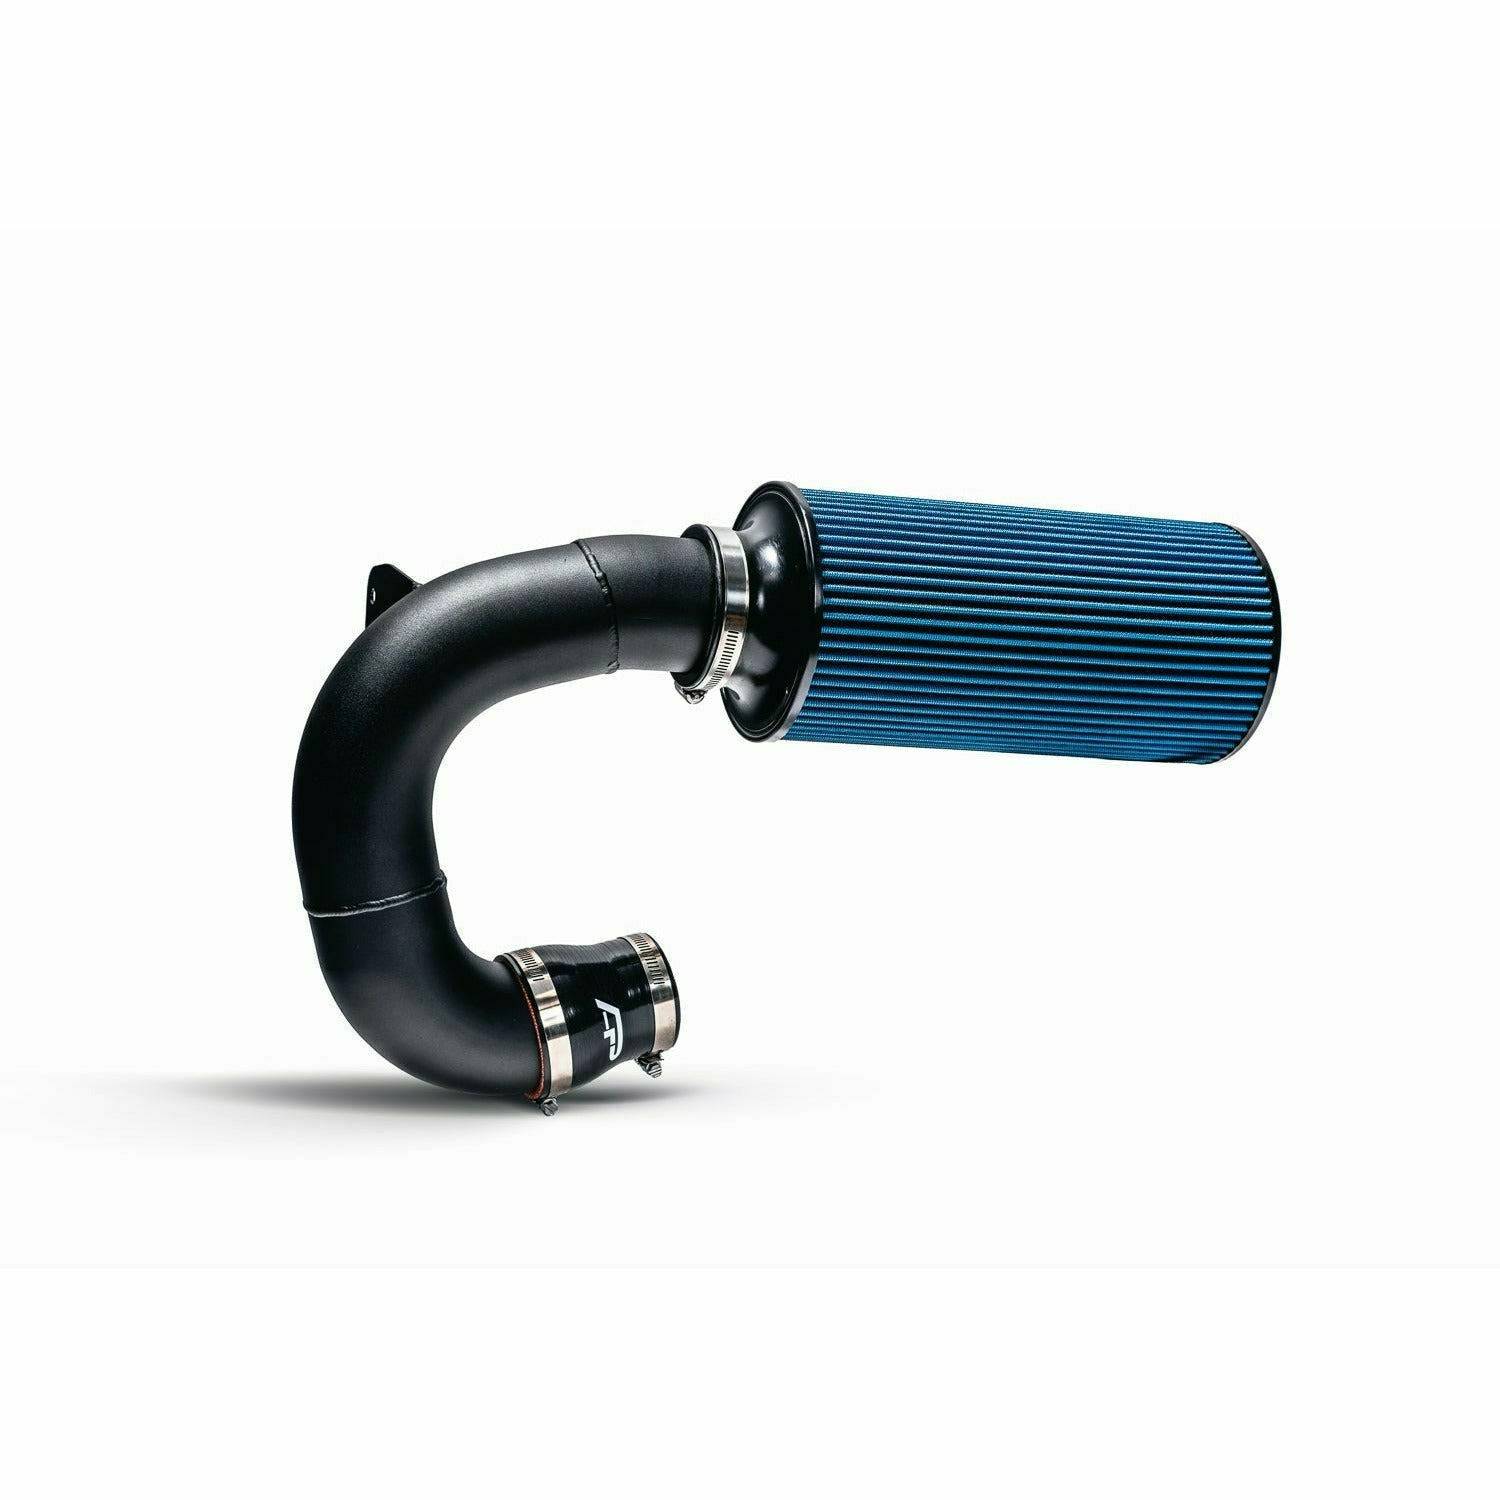 Agency Power Arctic Cat Wildcat XX Cold Air Intake Kit